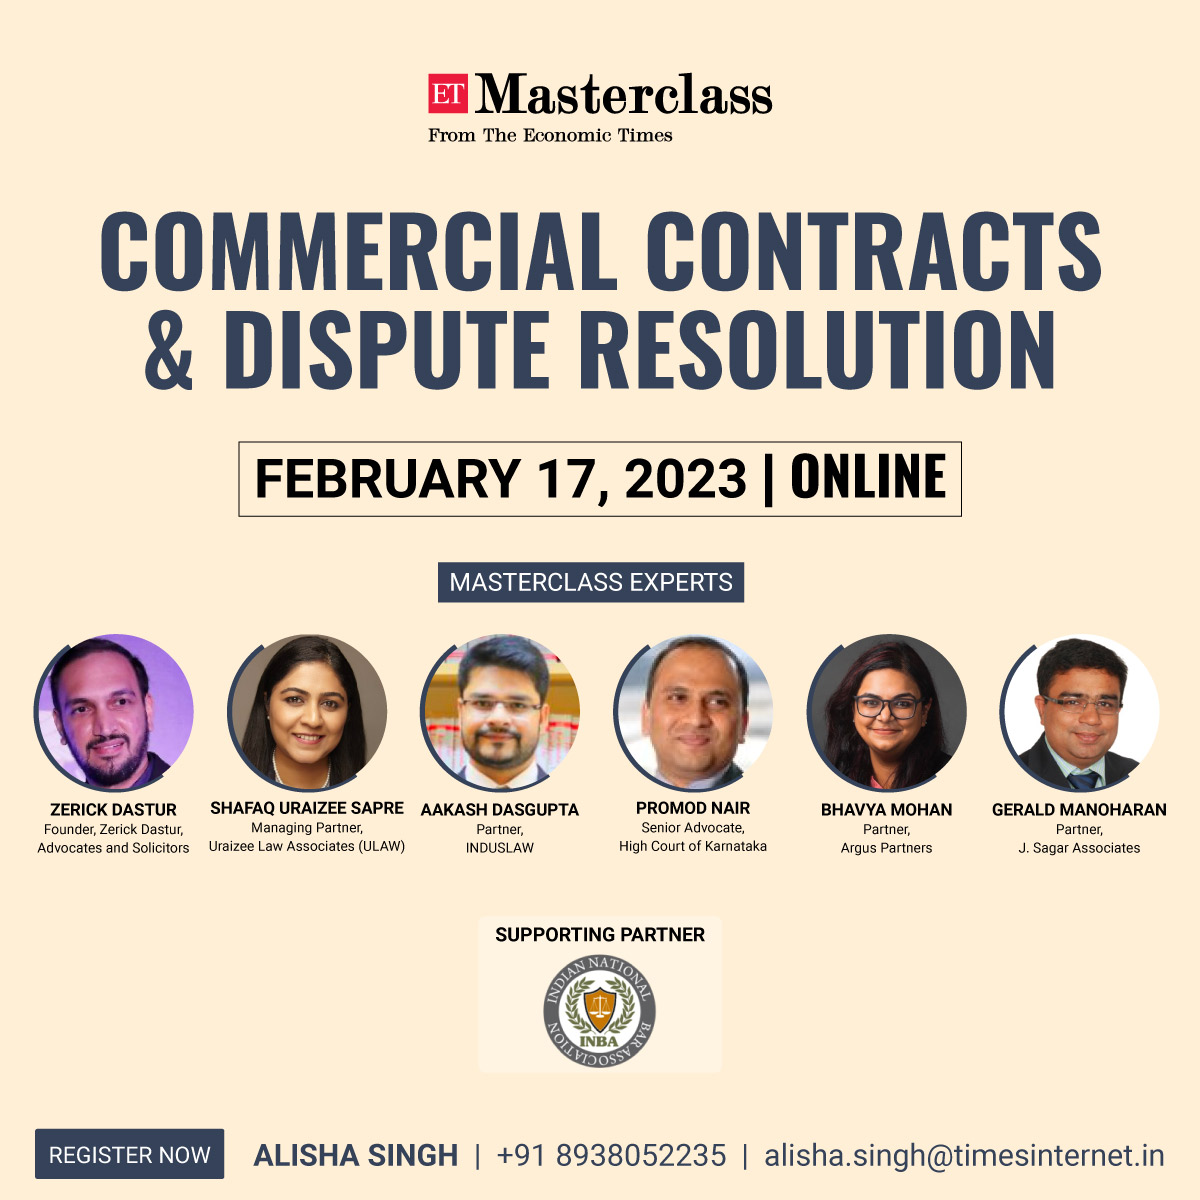 INBA Partners Economic Times For ET Masterclass On Commercial Contracts & Dispute Resolution On February 17, 2023